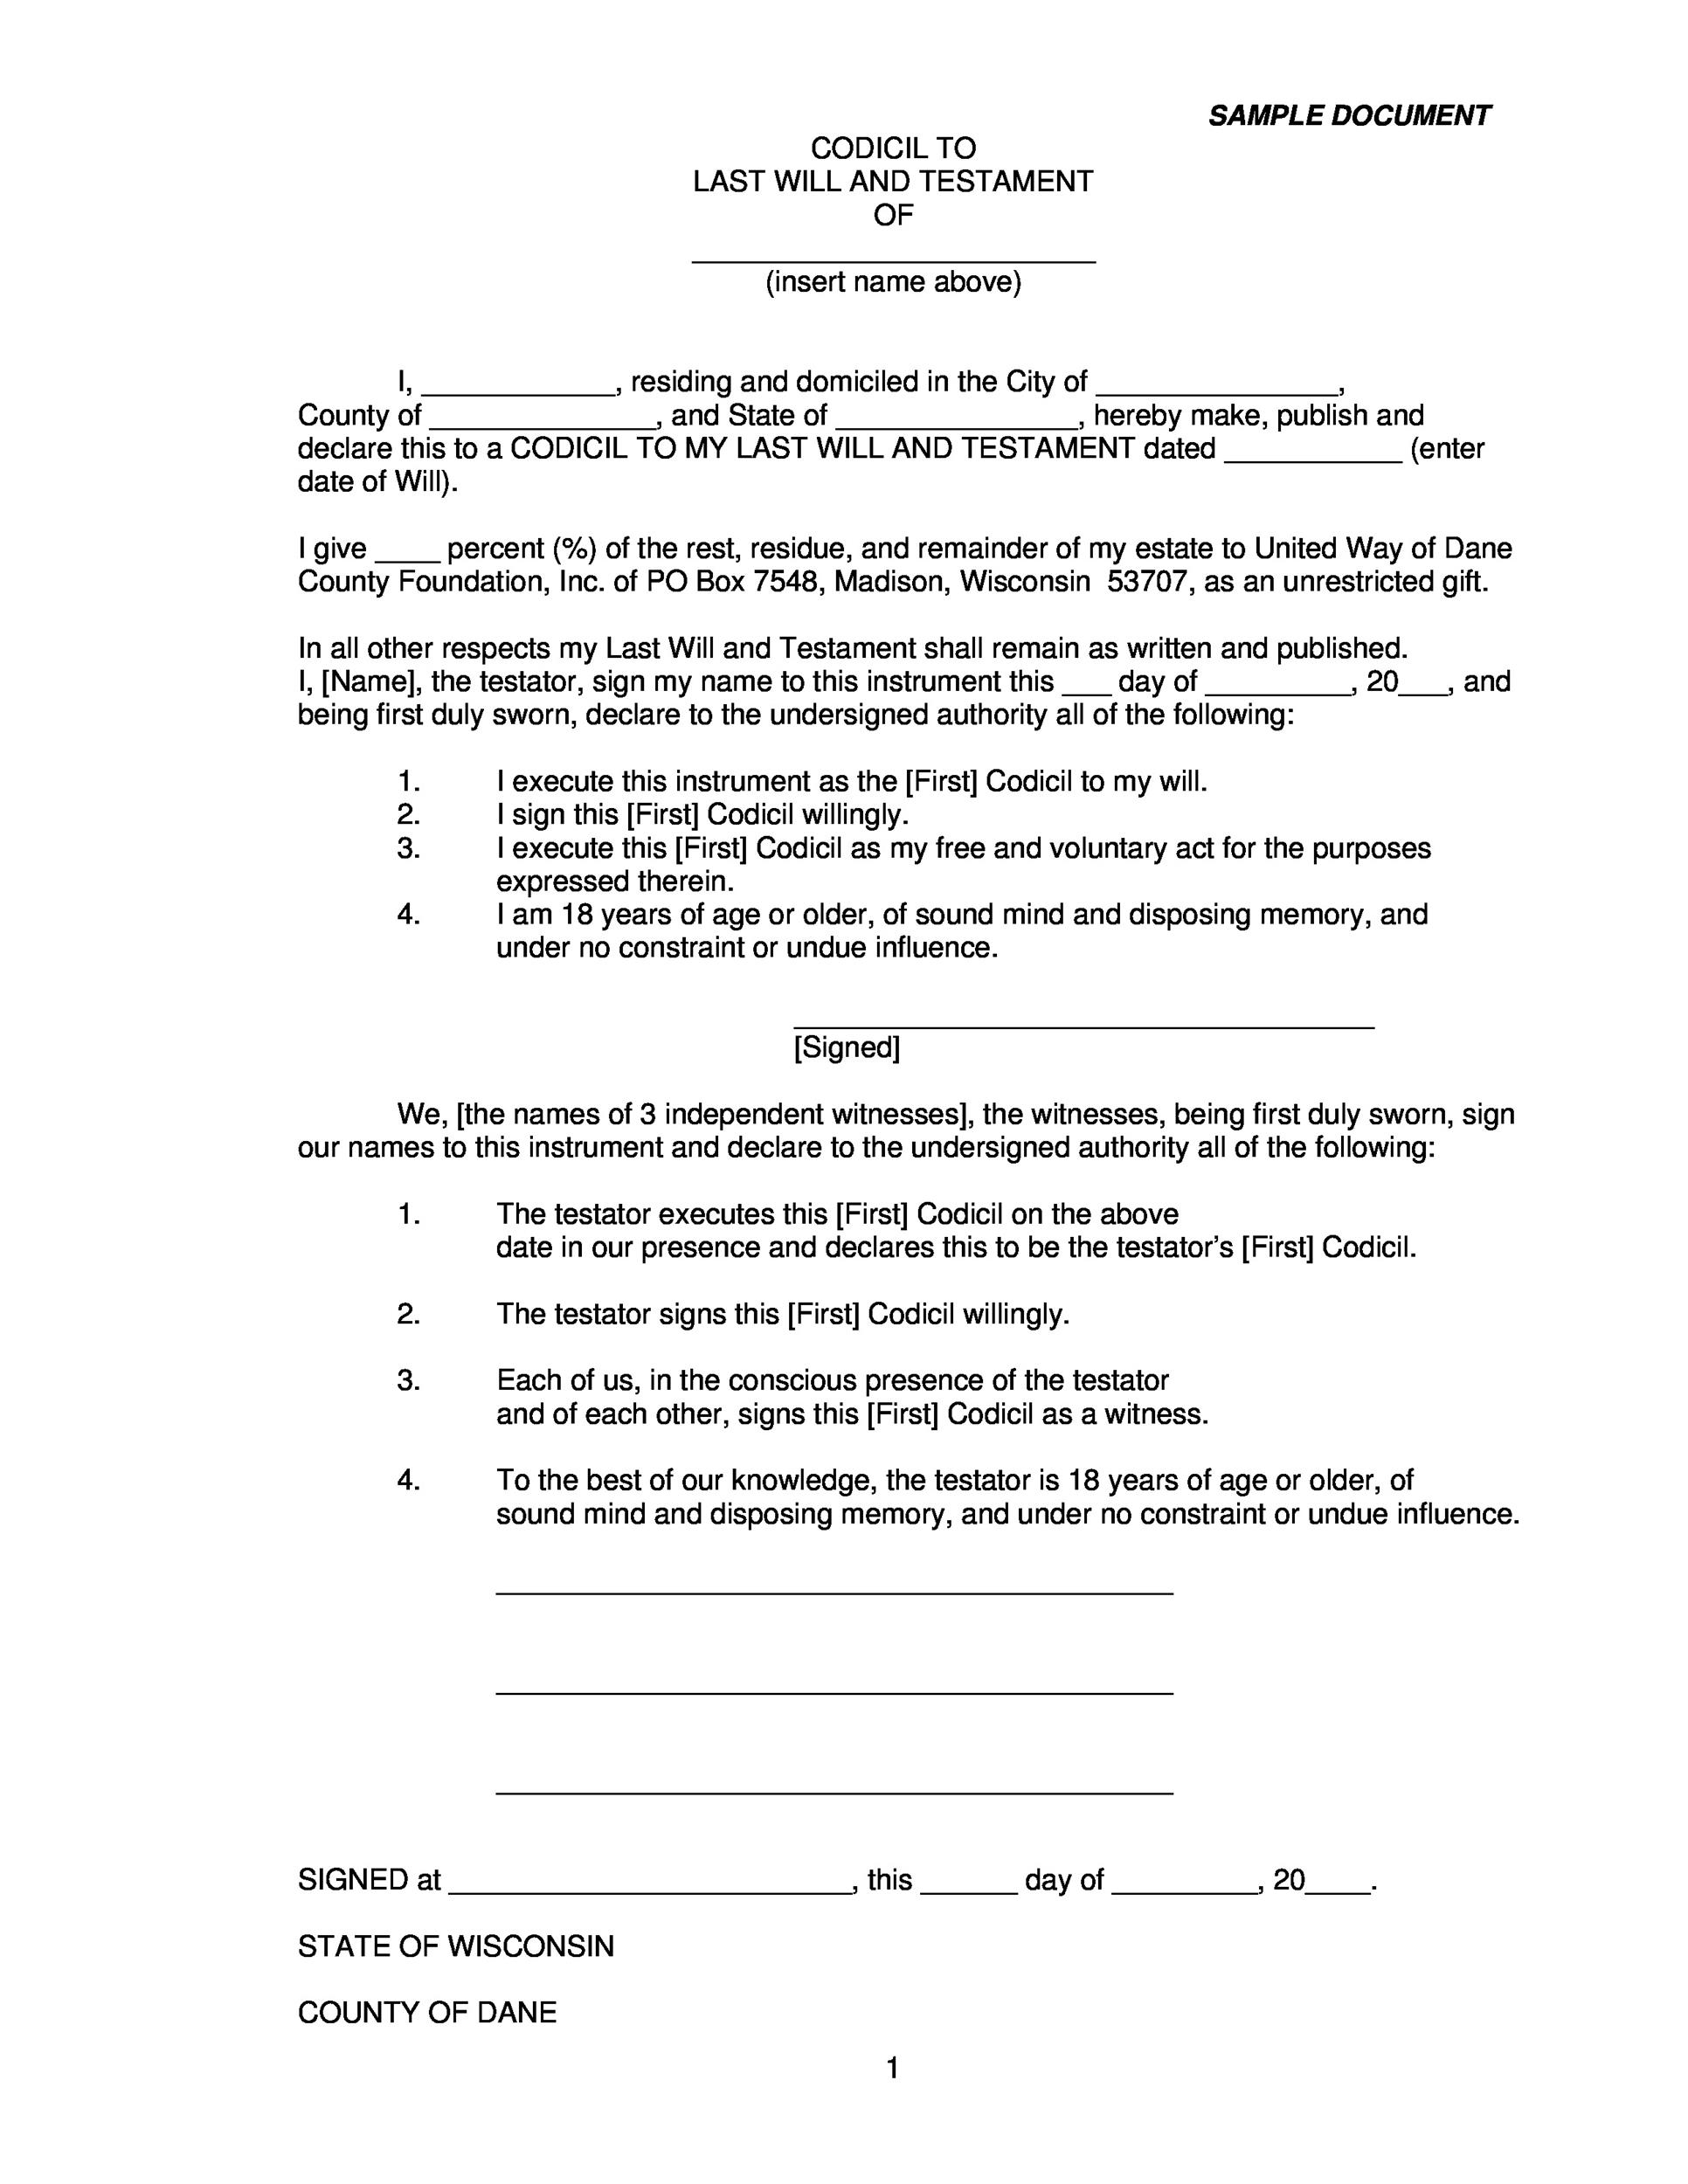 Free Printable Last Will And Testament Nj TUTORE ORG Master of